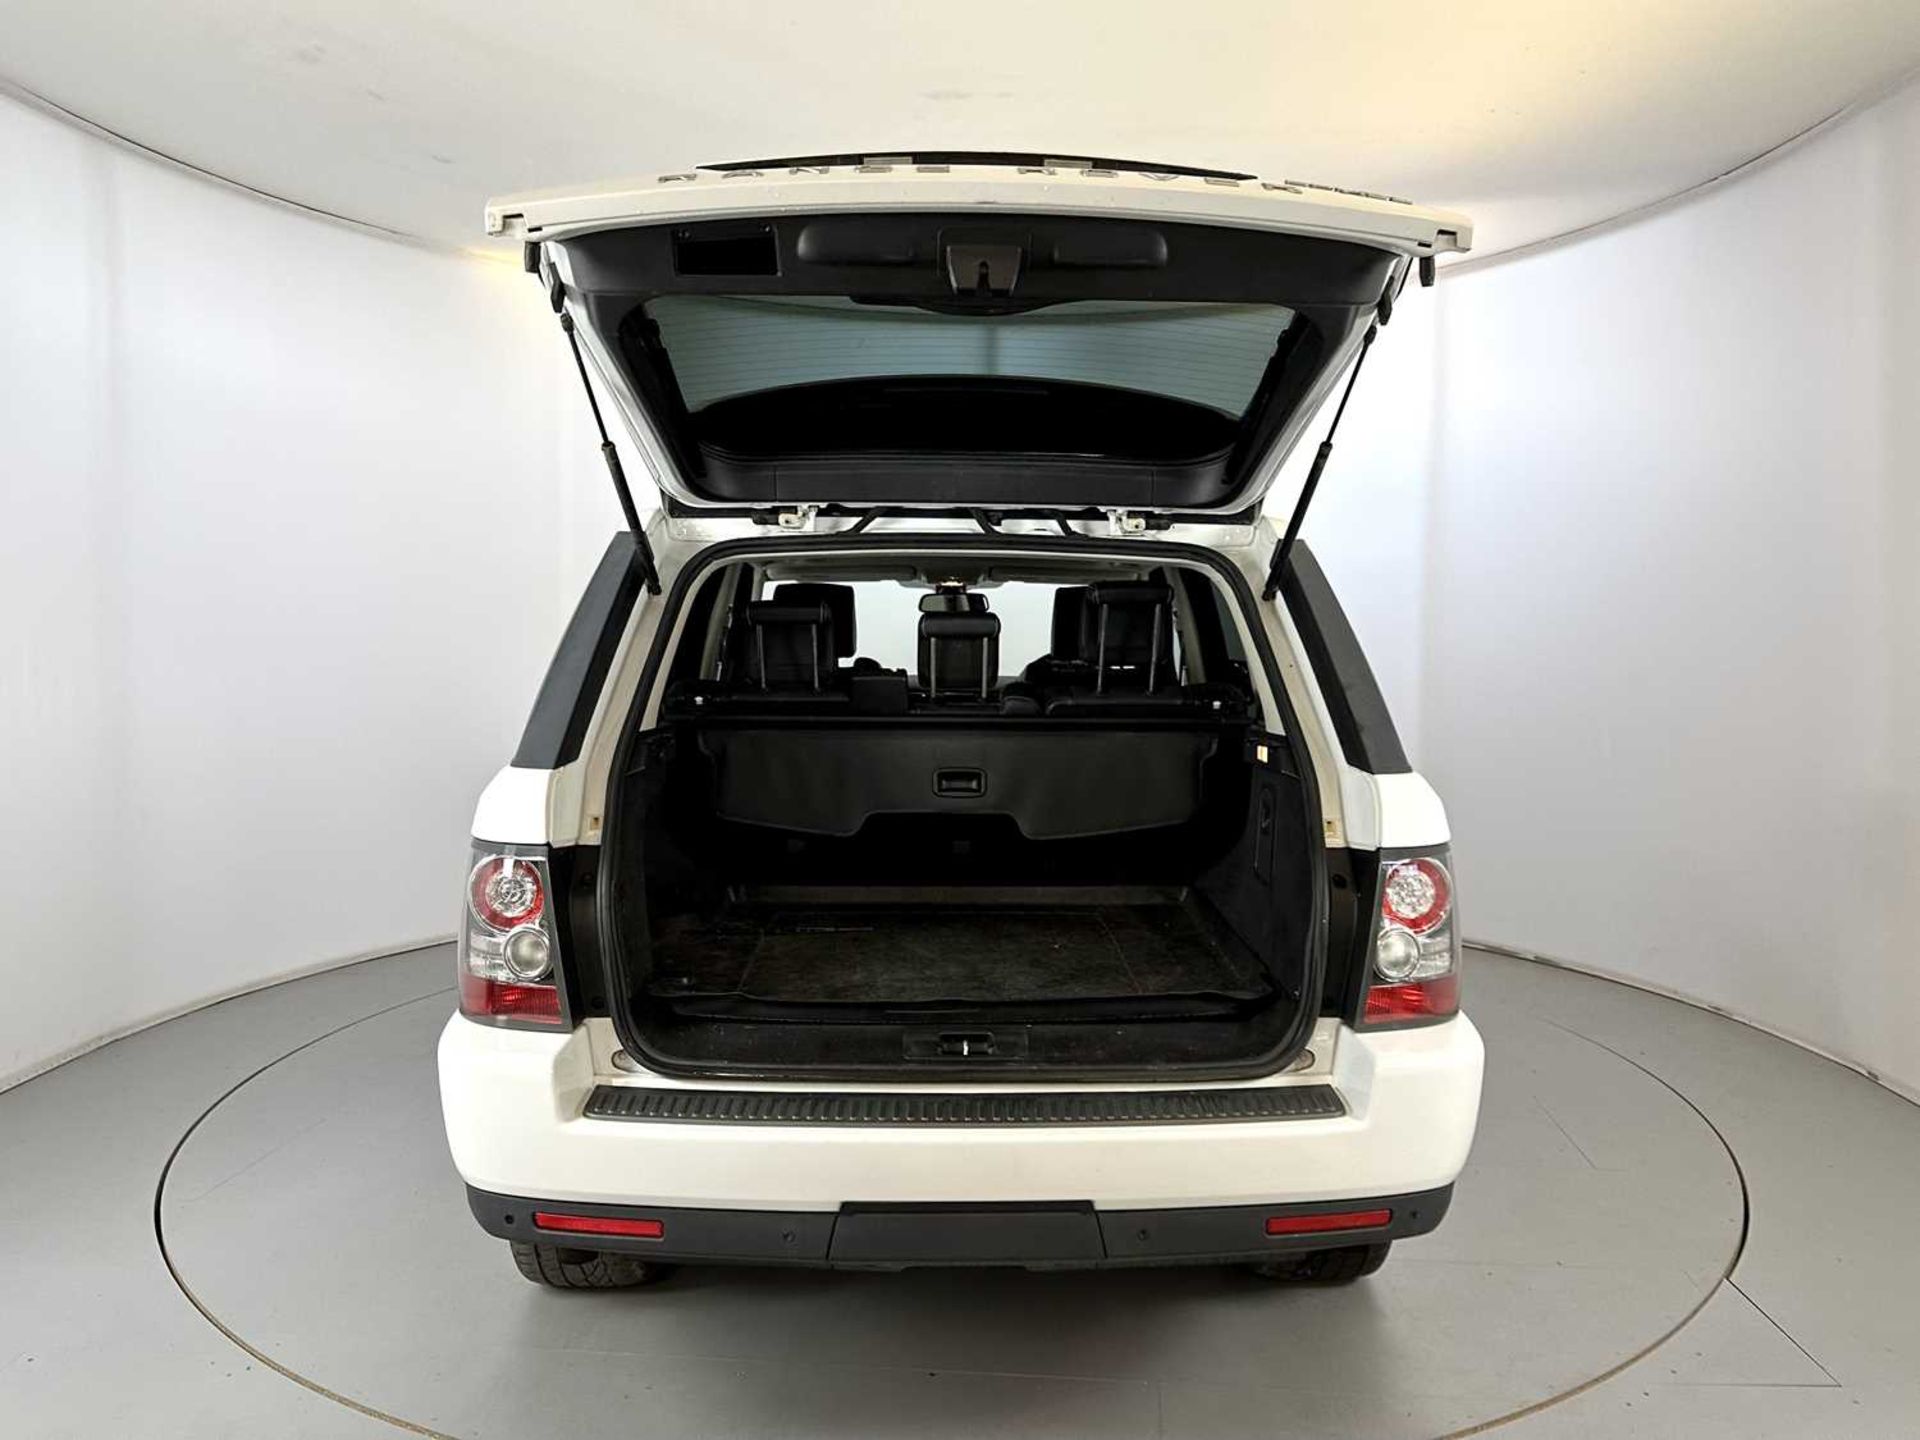 2010 Land Rover Range Rover Sport - Image 32 of 34